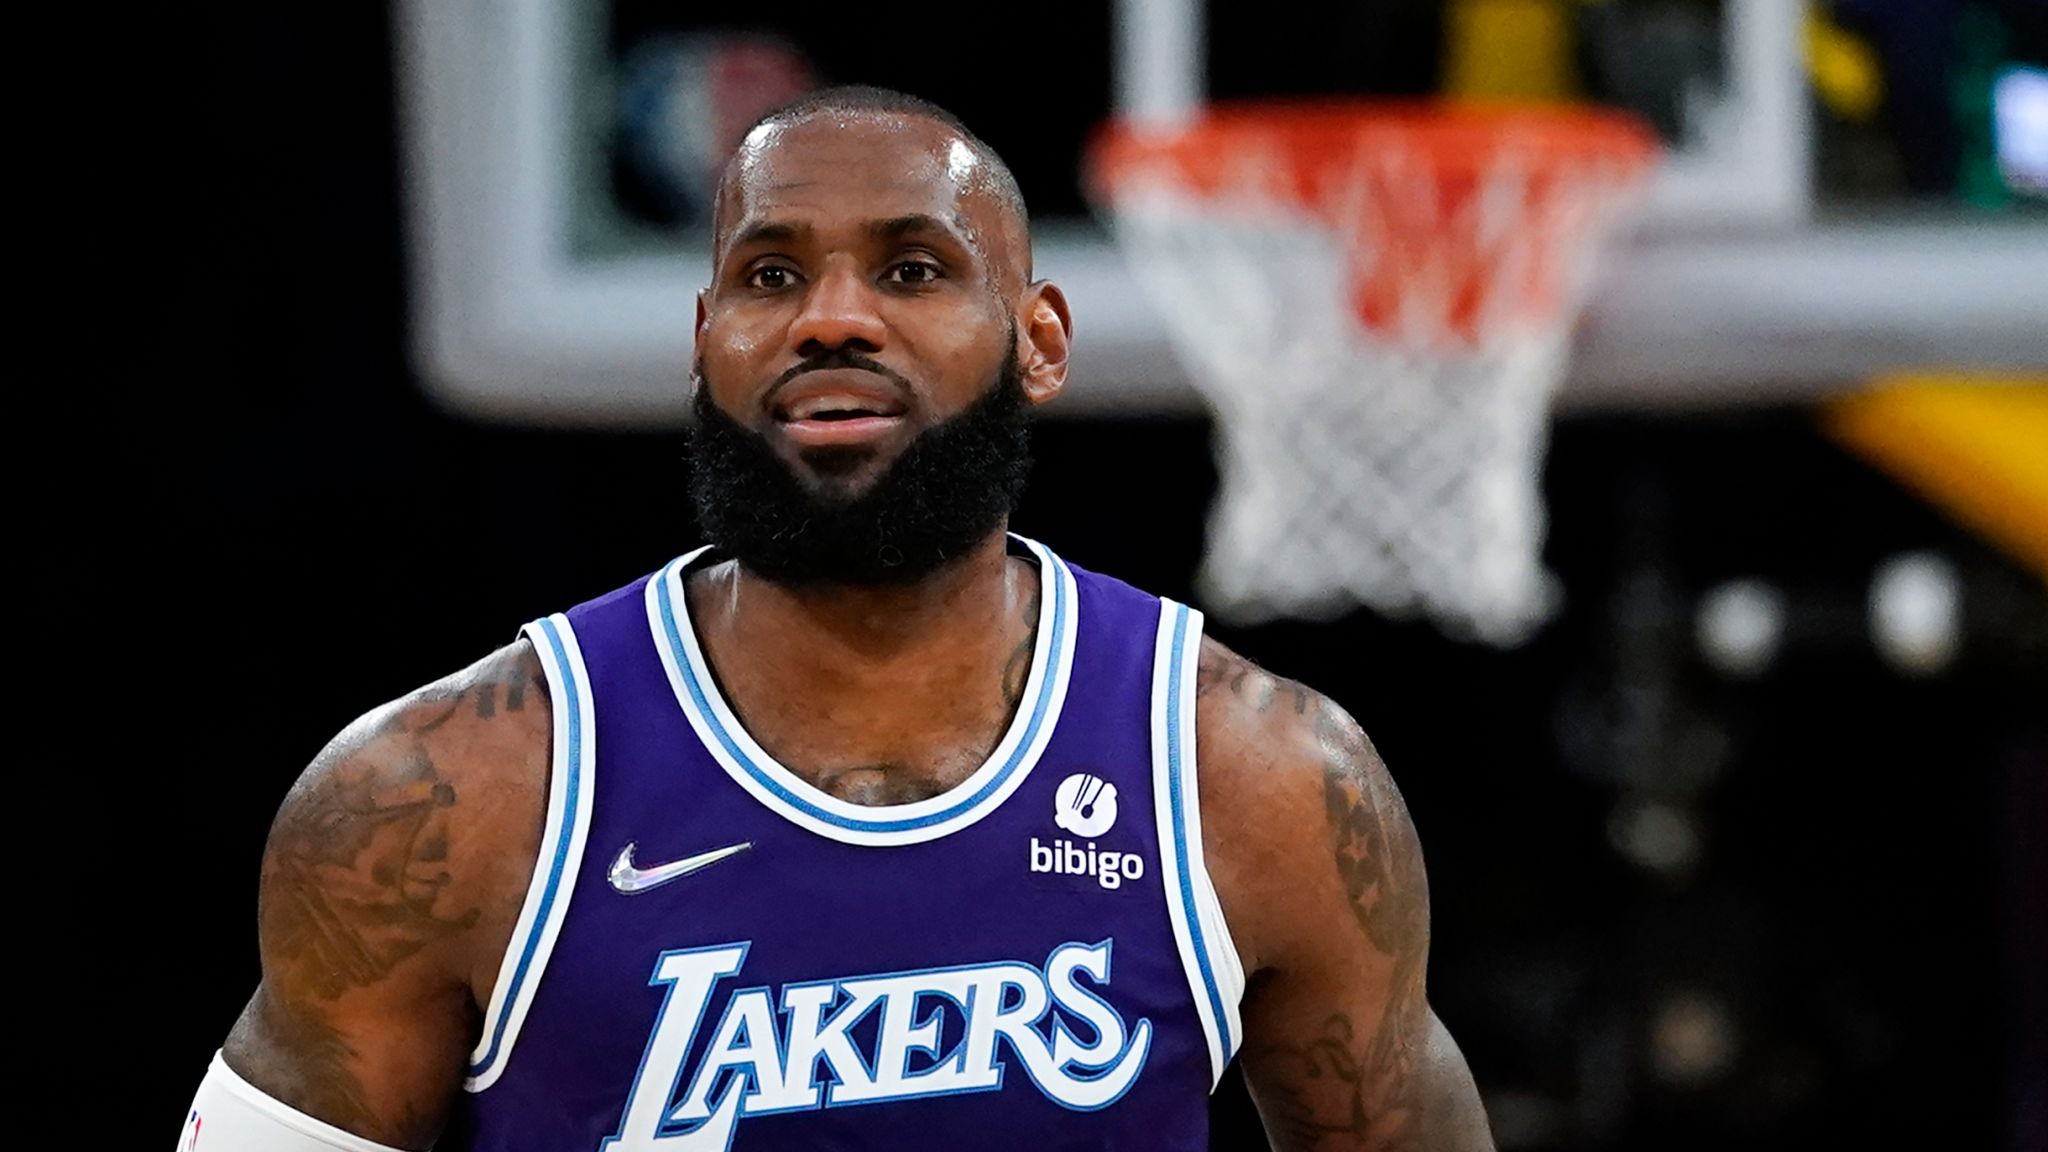 LeBron James has never been the highest paid player on his team